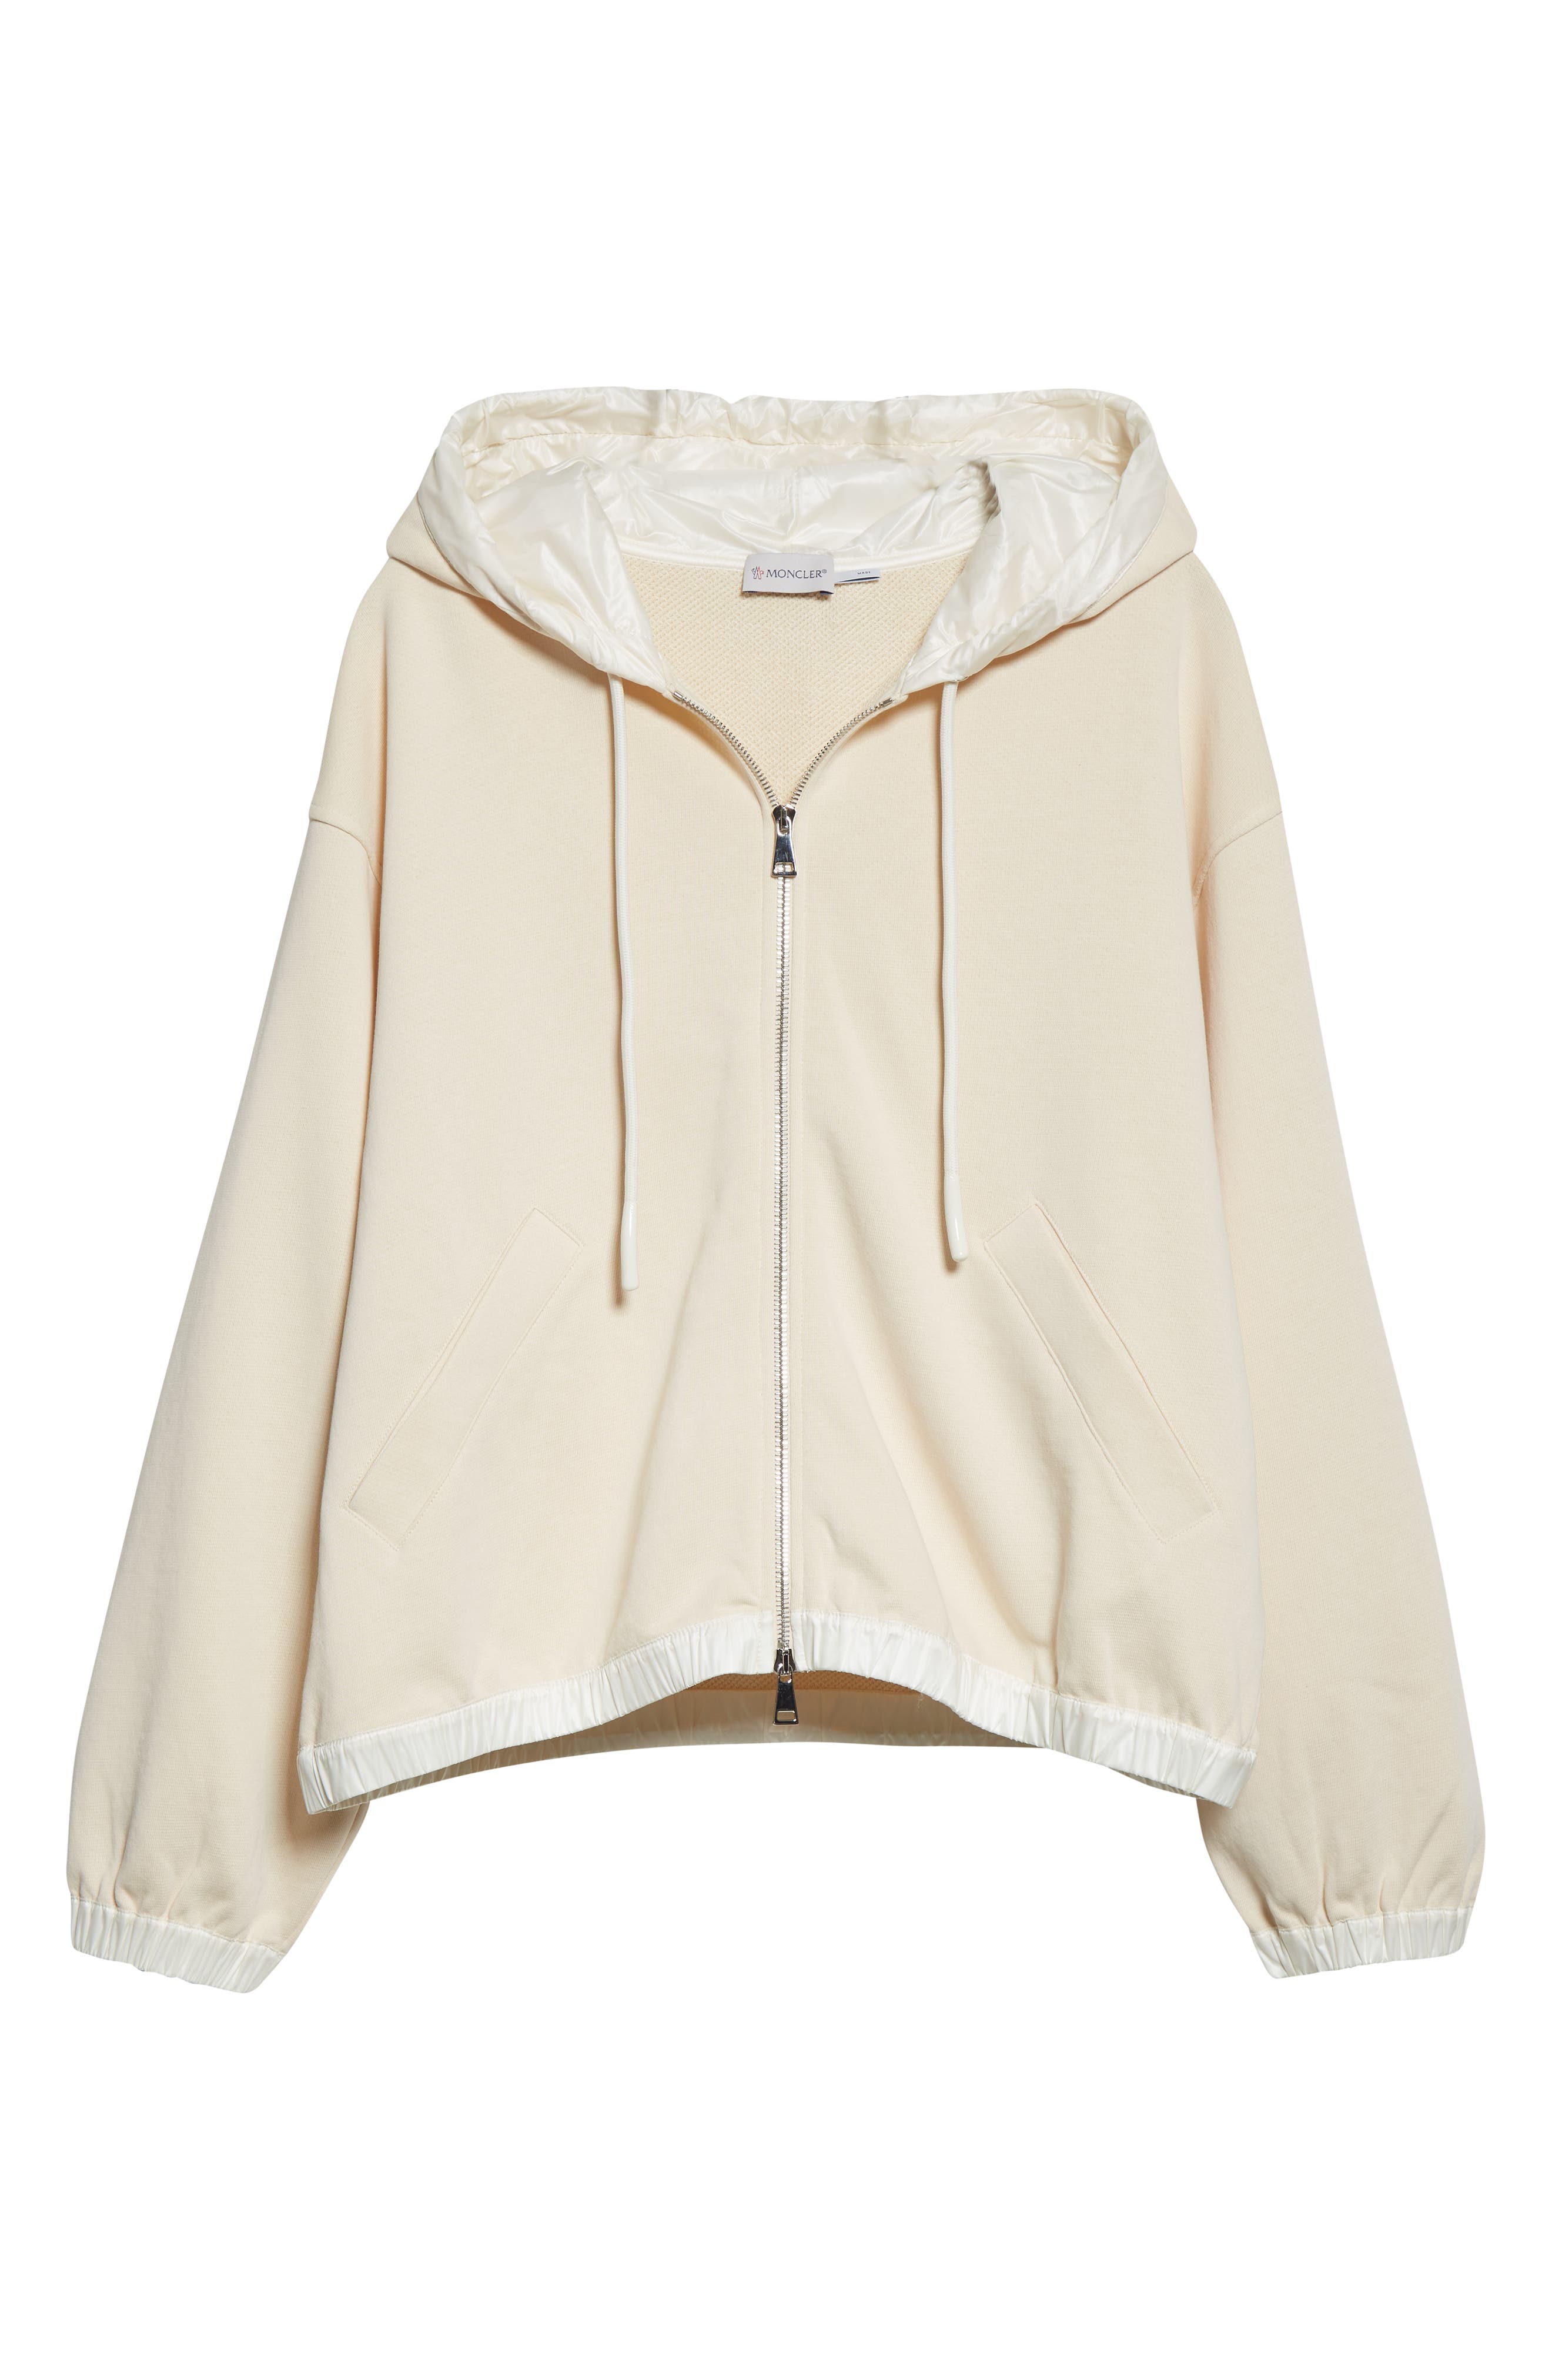 Moncler Women's Cotton Blend Zip-Up Hoodie in 213 Ivory